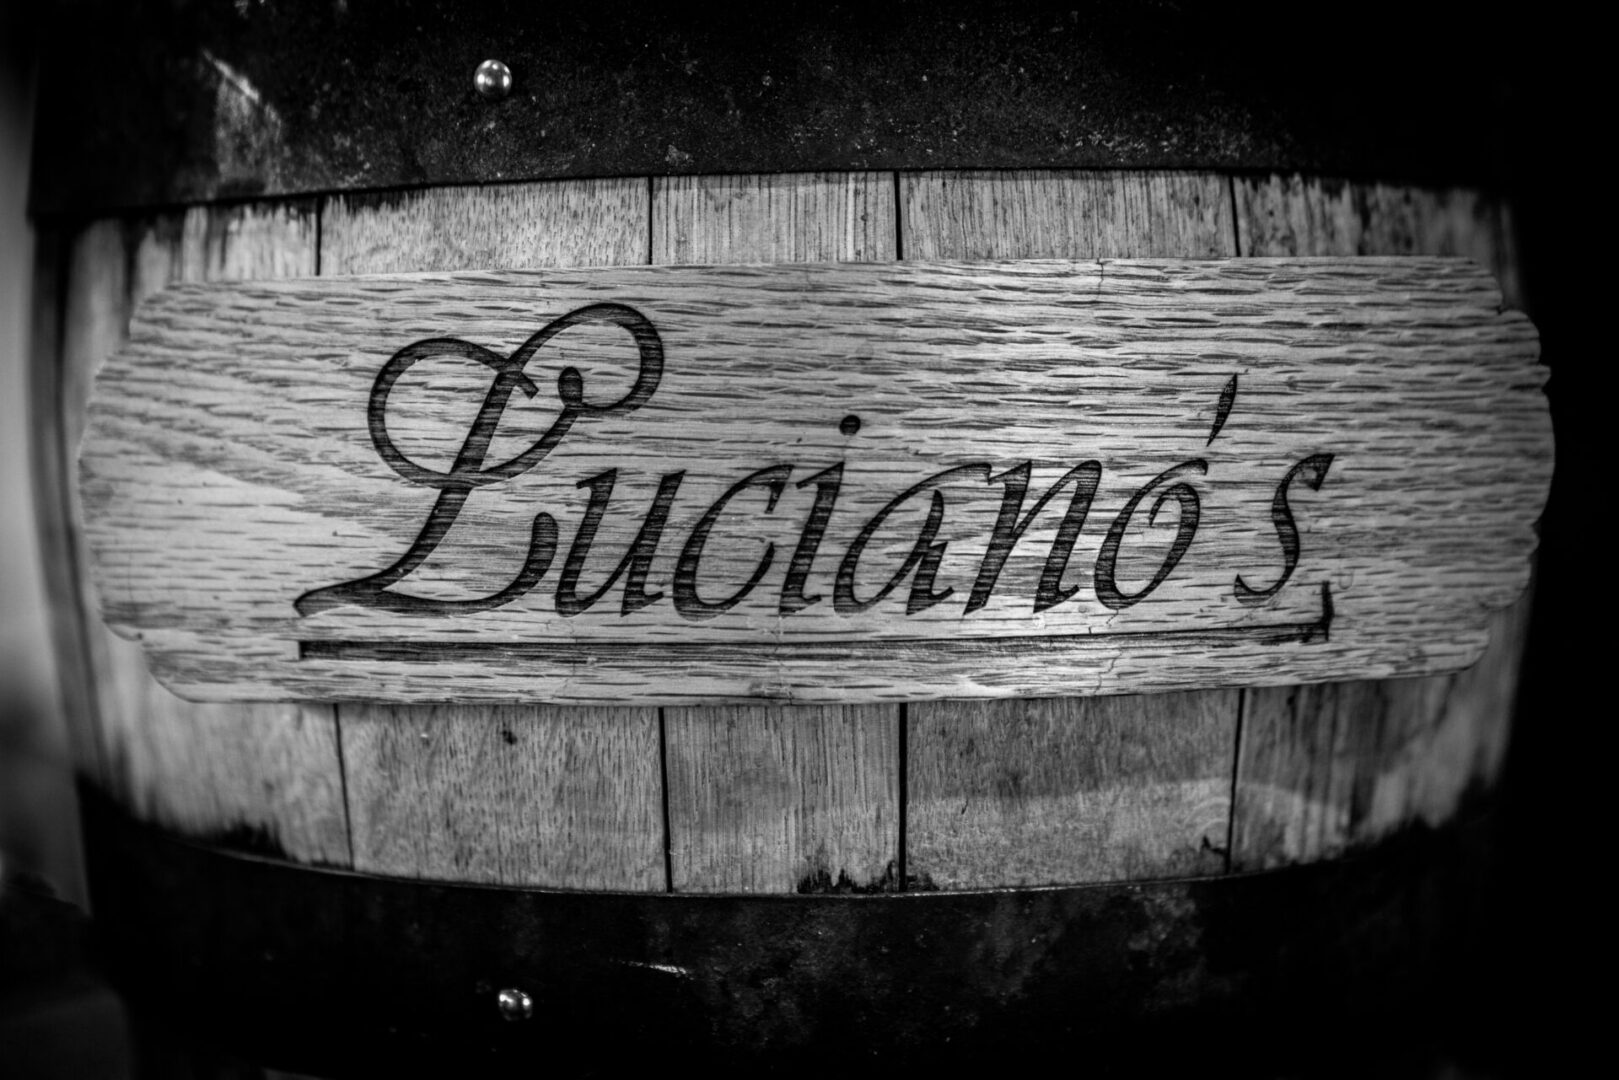 A black and white photo of the name luciano 's